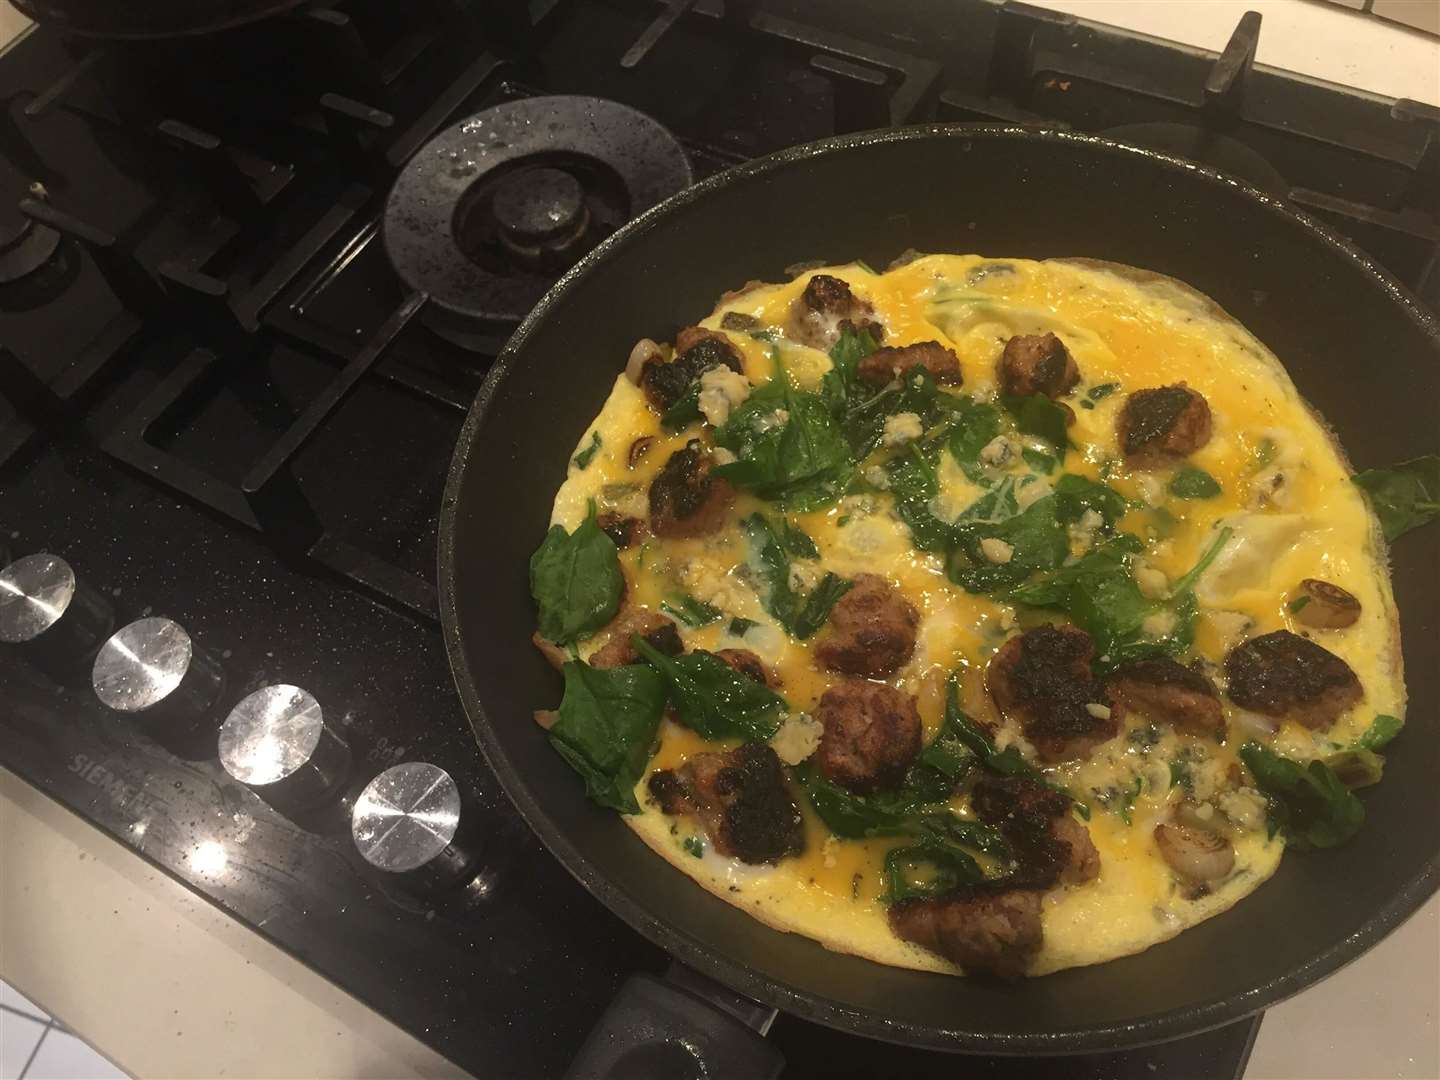 My delicious omlette